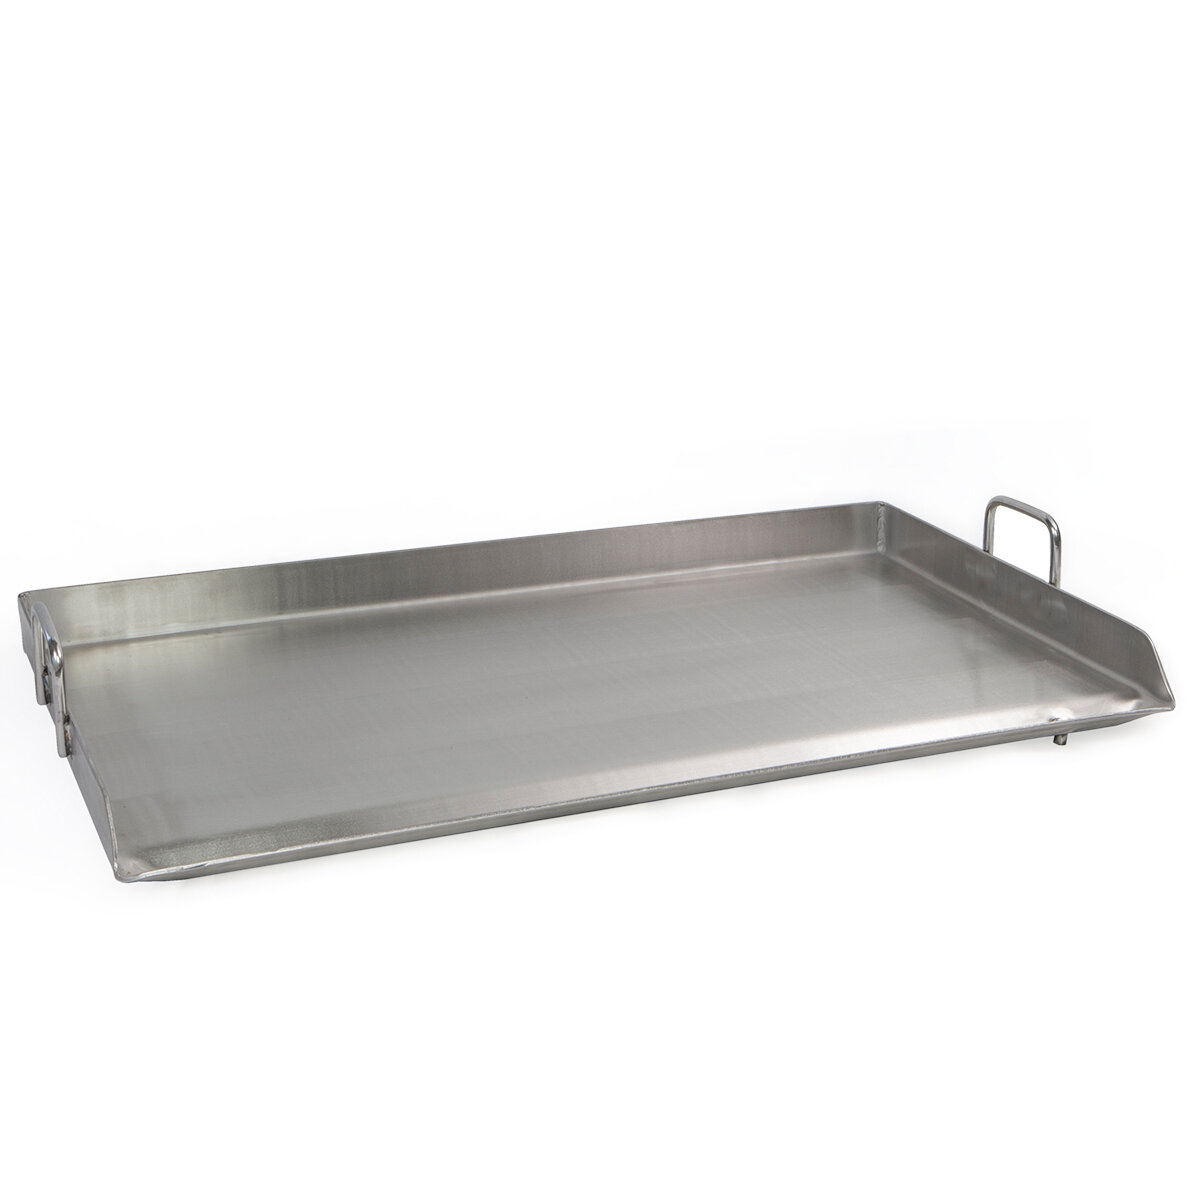 XtremepowerUS 17 x 16 Stainless Steel Comal Flat Top BBQ Cooking Griddle  Pan